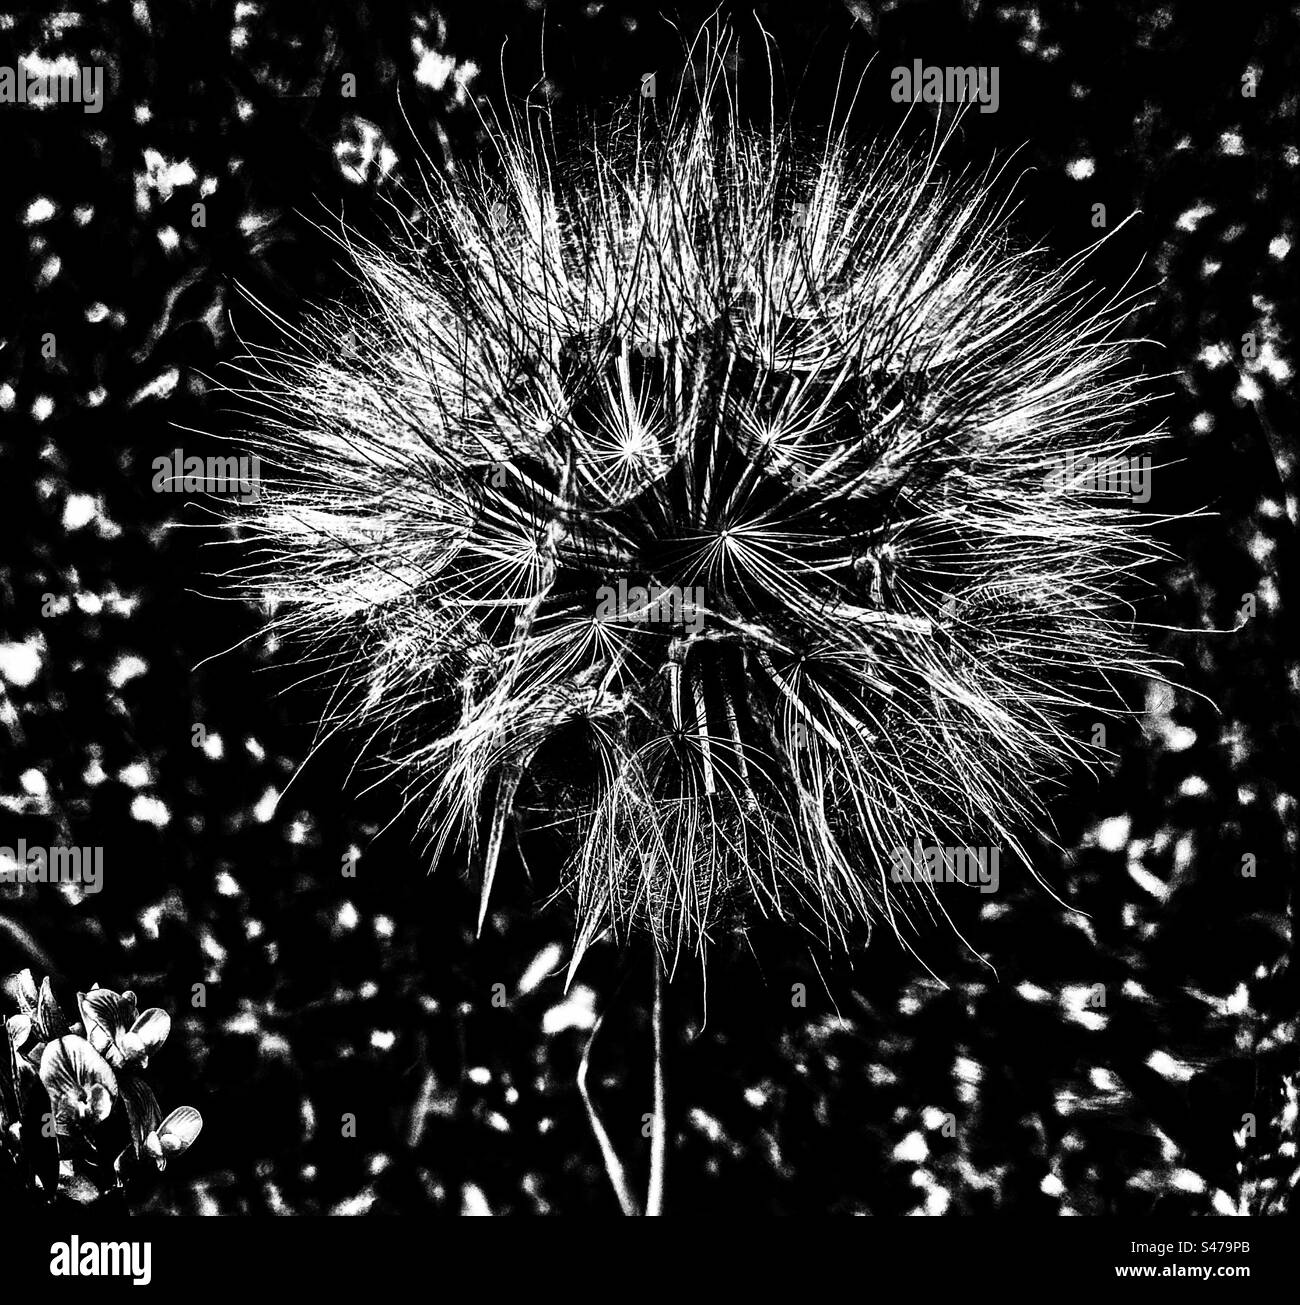 Black and white high contrast dandelion Stock Photo